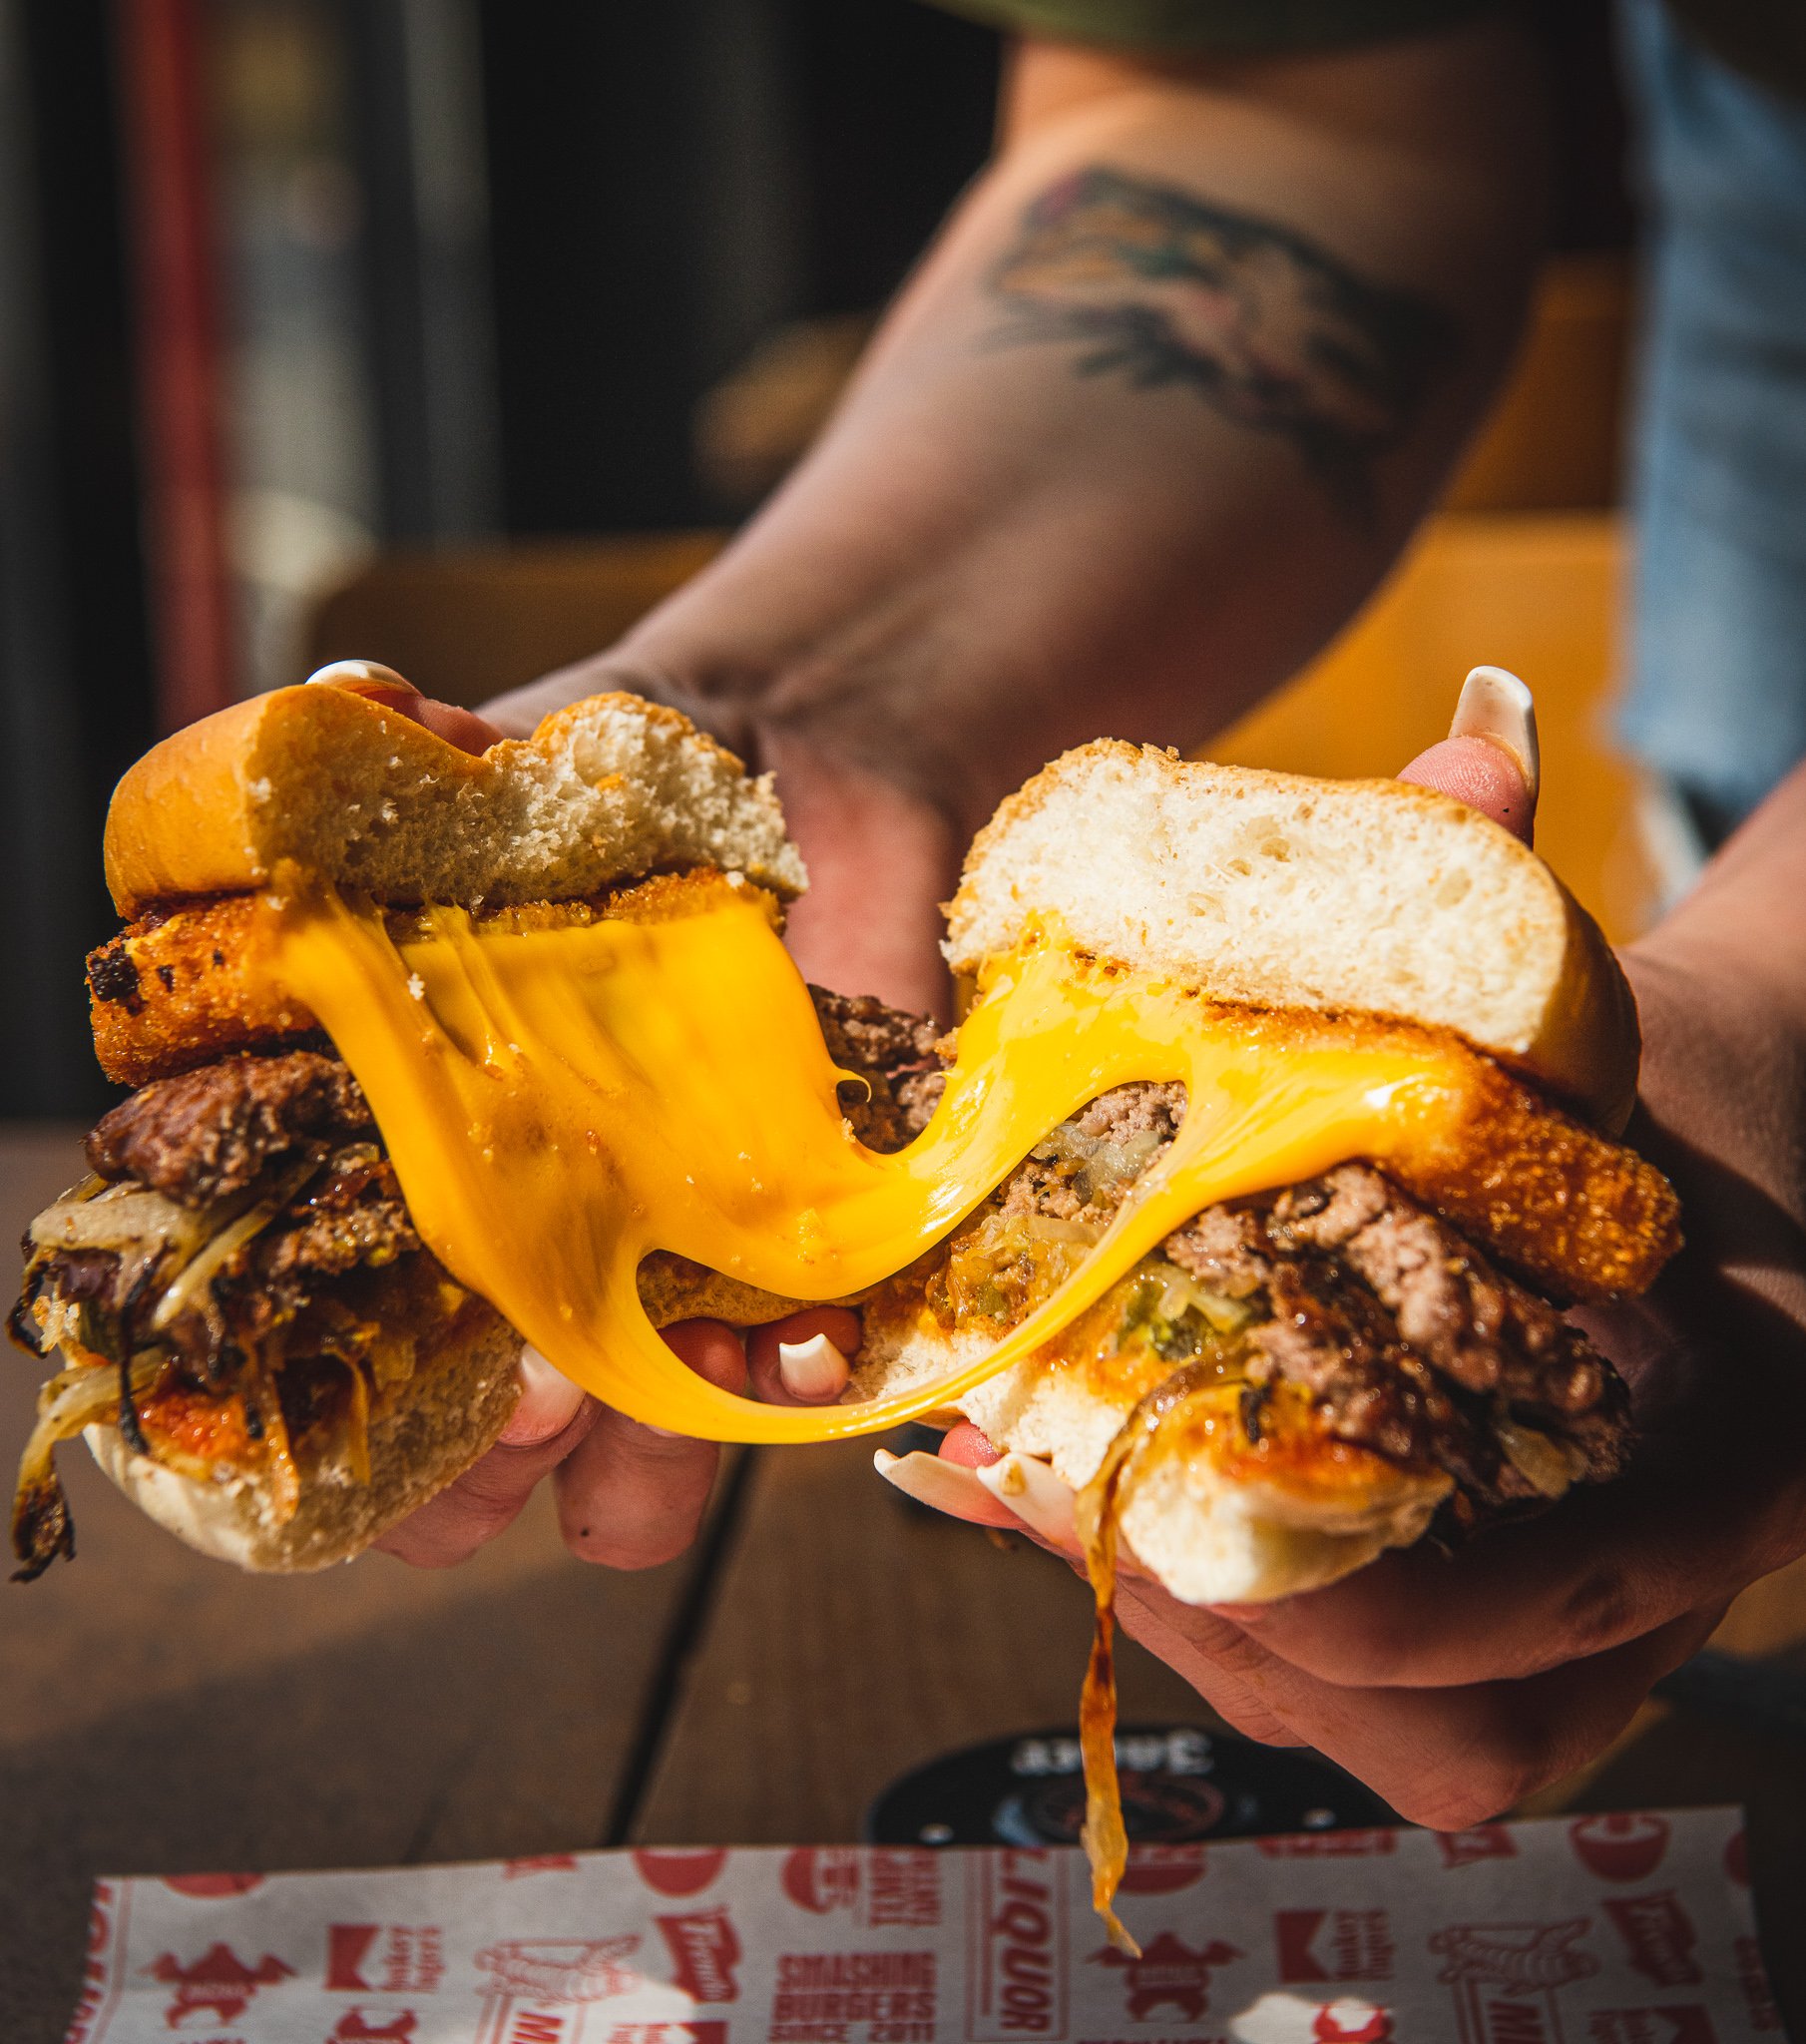 London Food and Drink Photography - Meatliquor Menu London 2022 - Nic Crilly-Hargrave-306.jpg